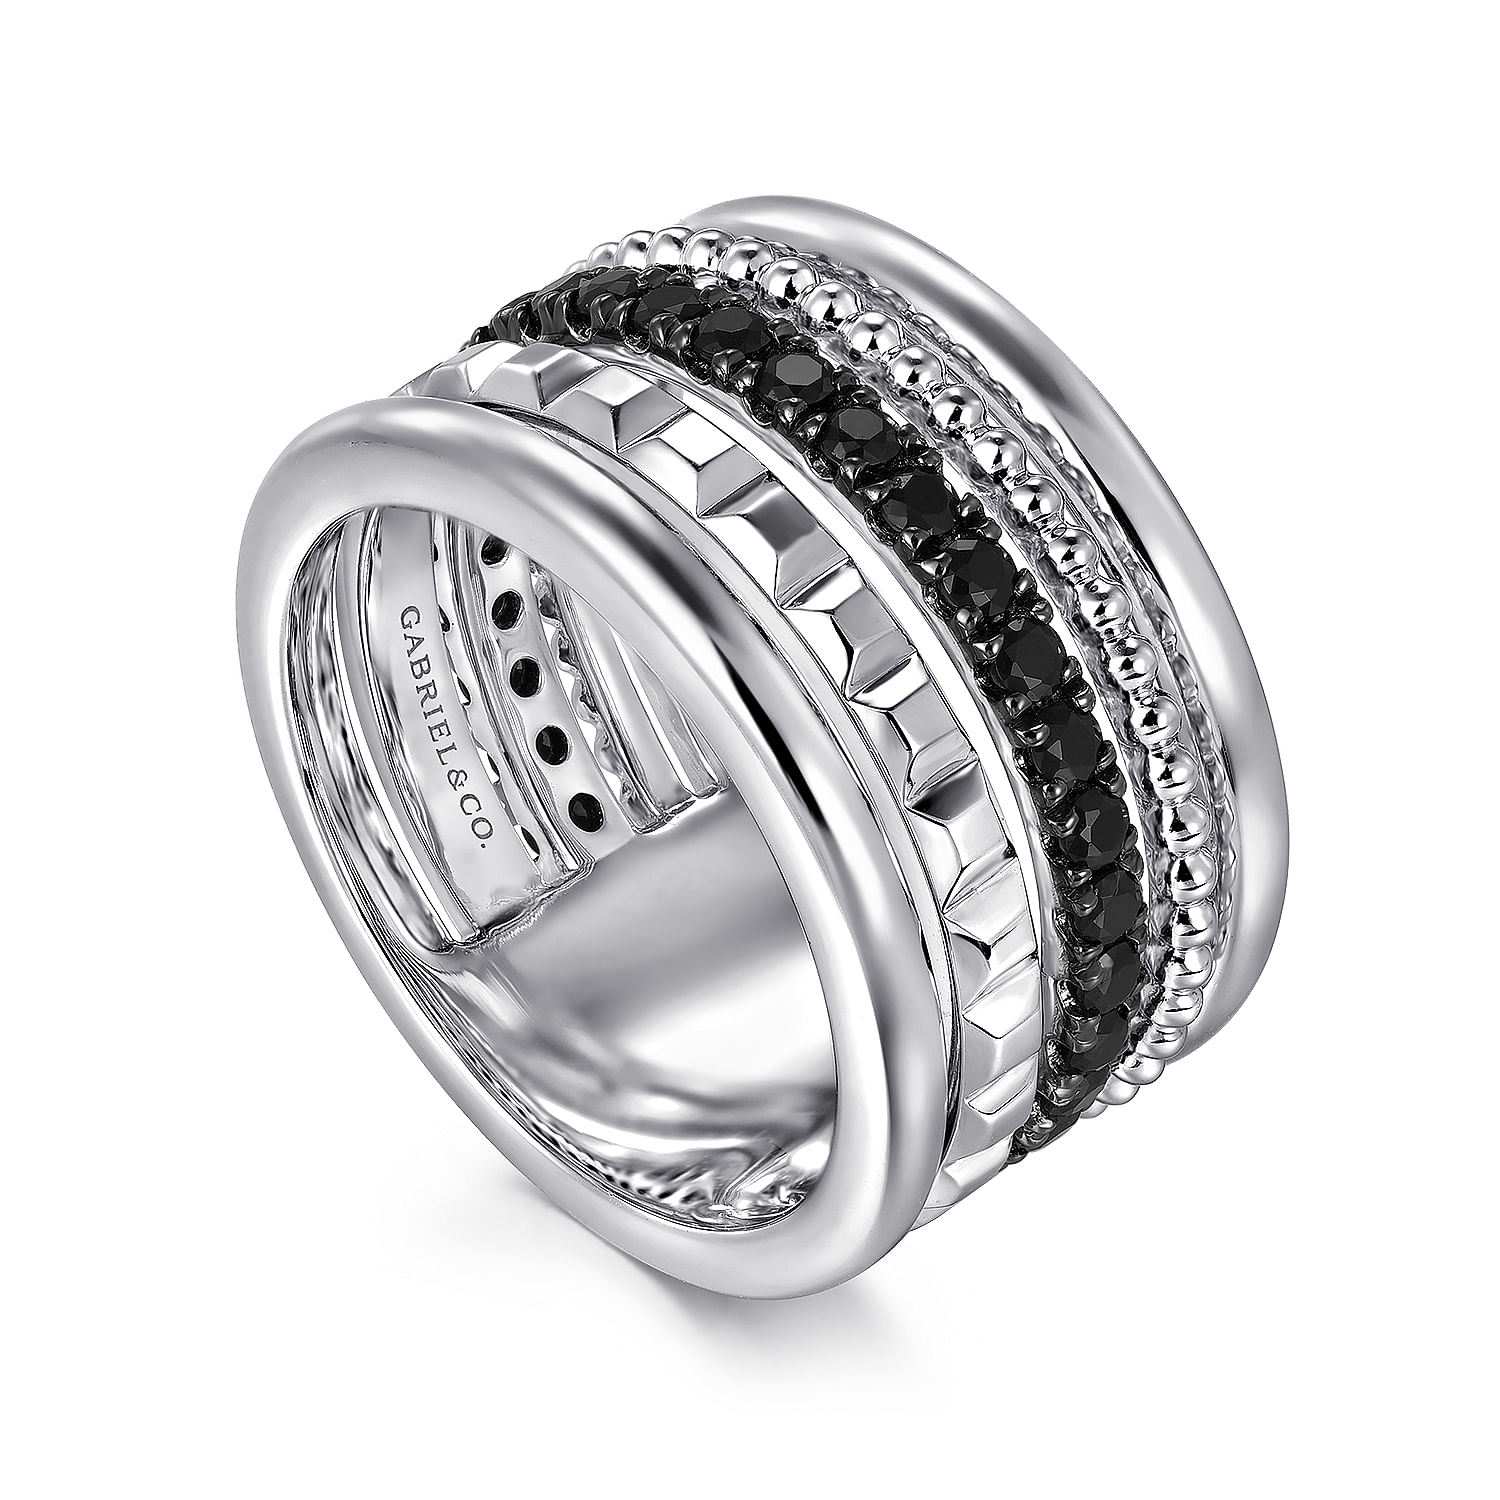 925 Sterling Silver Bujukan Black Spinel and Pyramid Multi Row Easy Stackable Ladies Ring